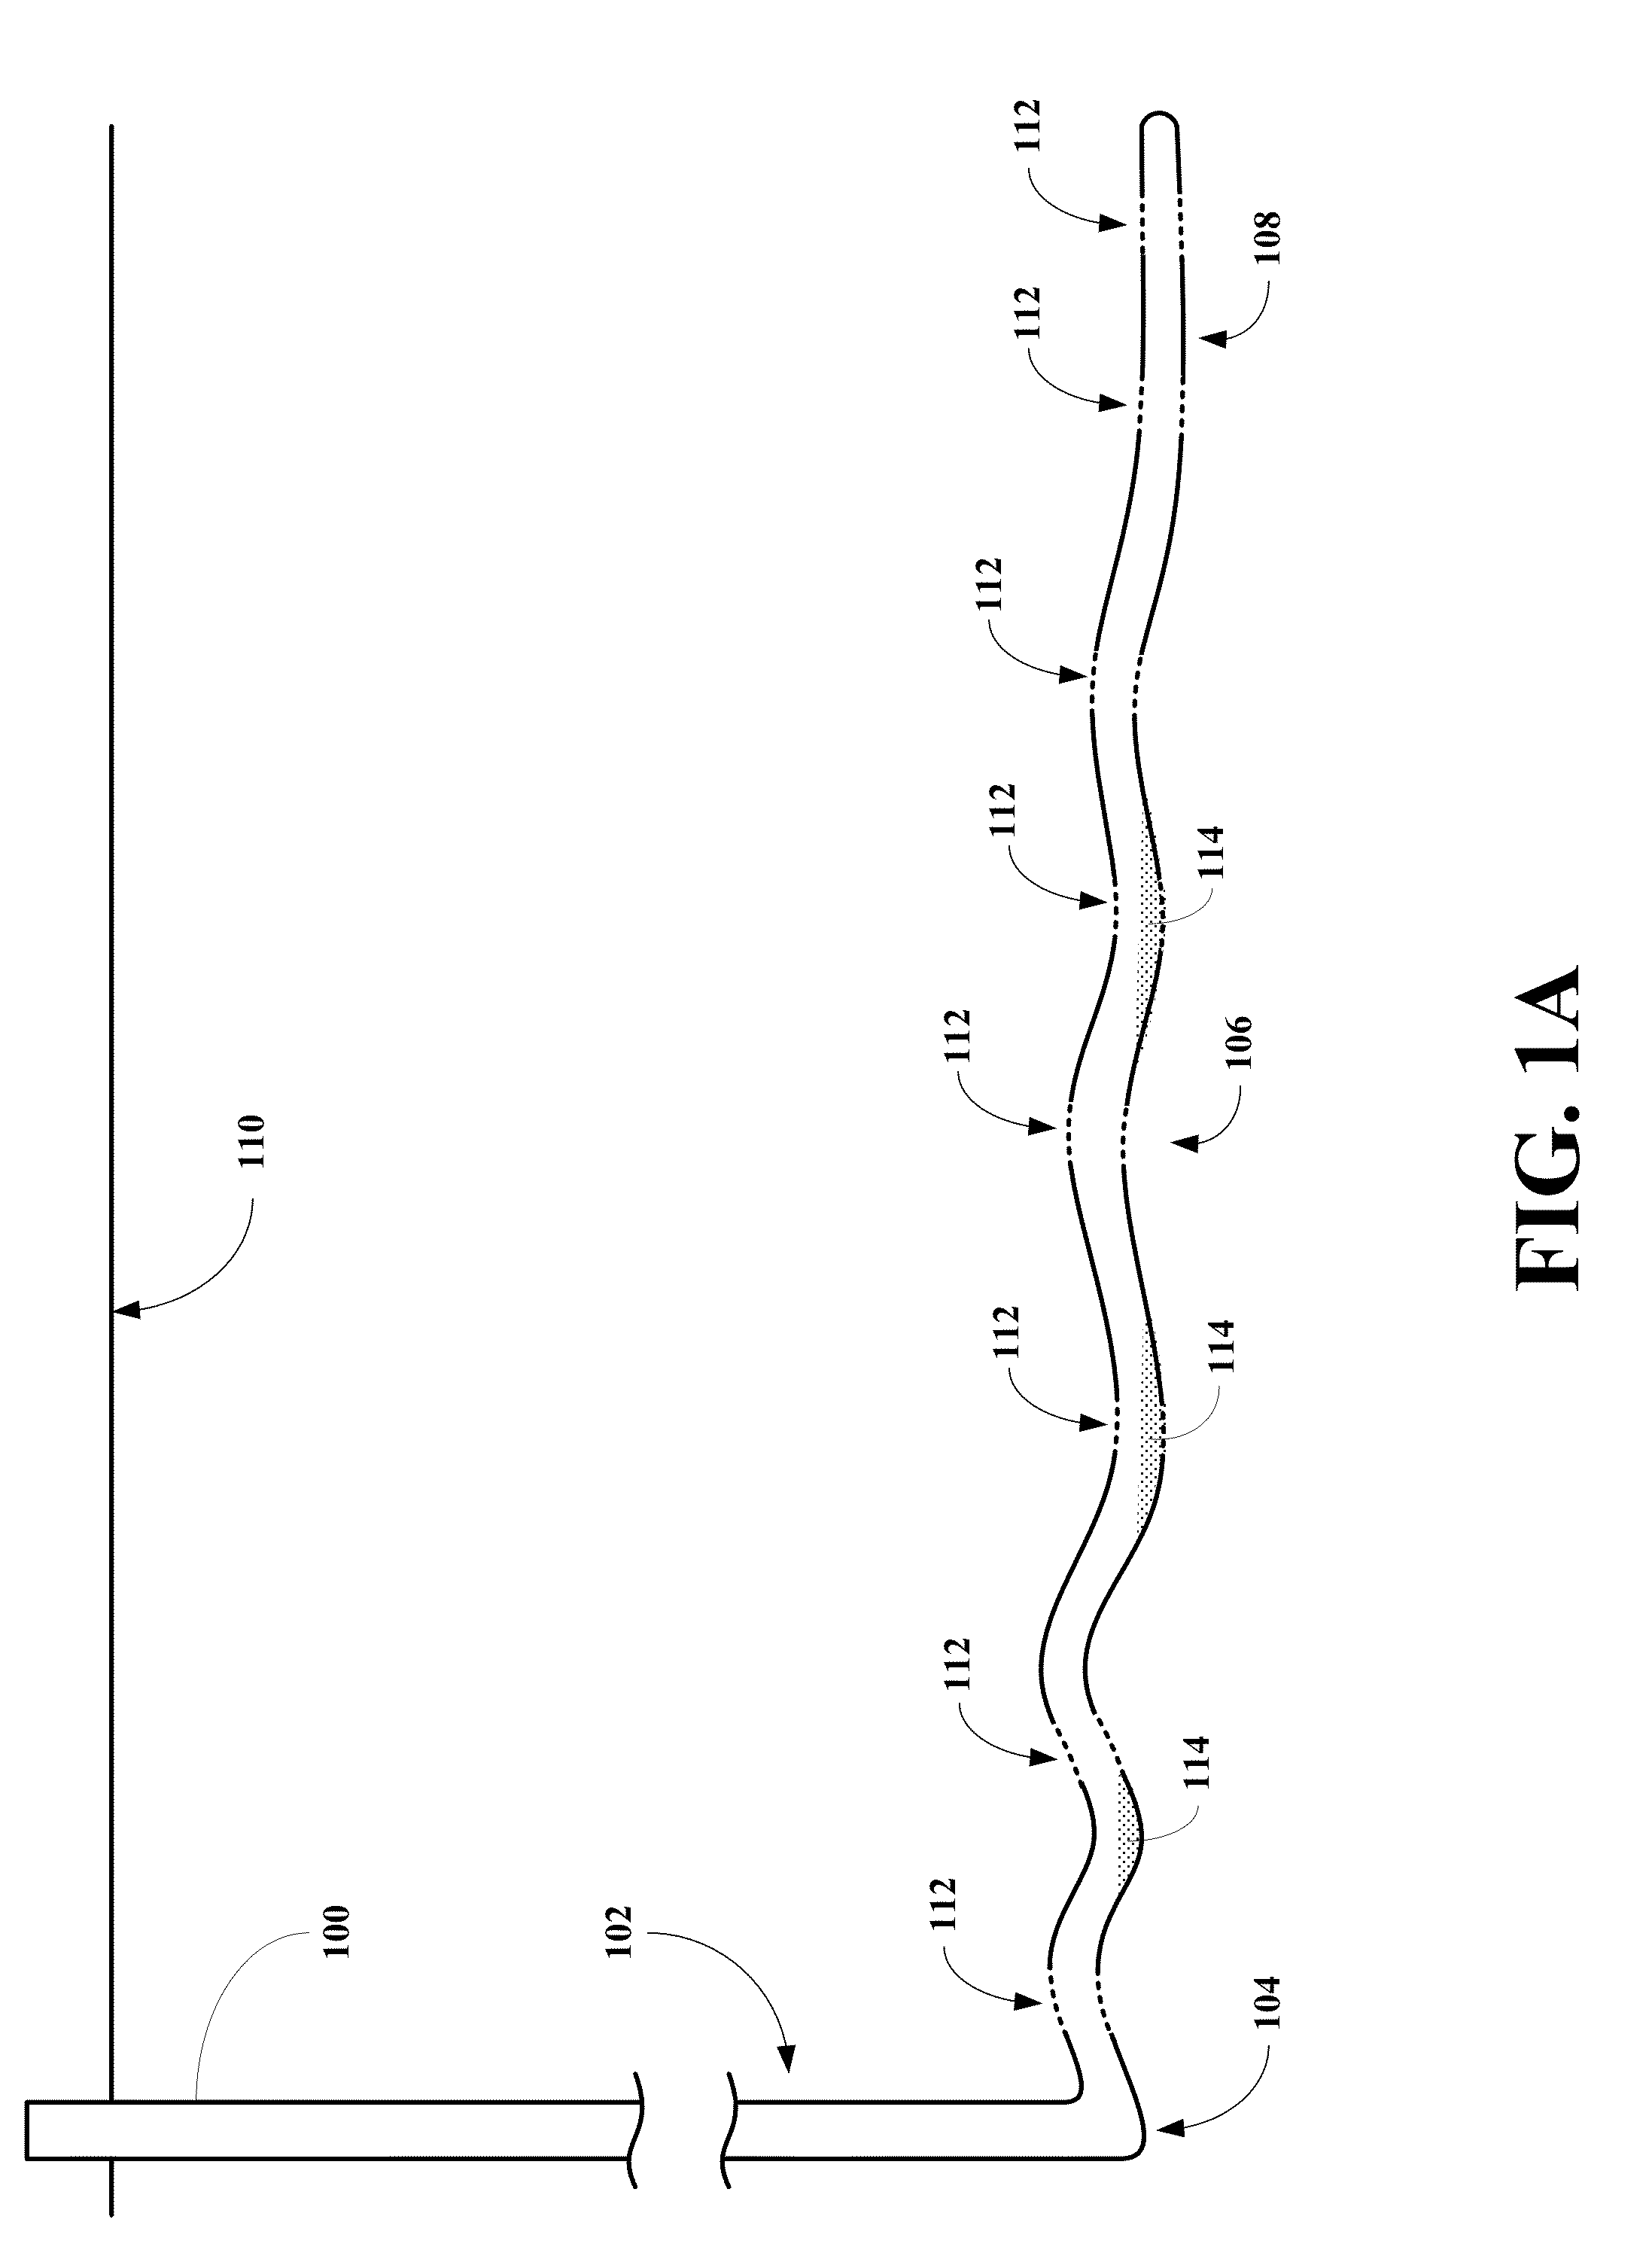 Apparatuses, systems, and methods for forming in-situ gel pills to lift liquids from horizontal wells